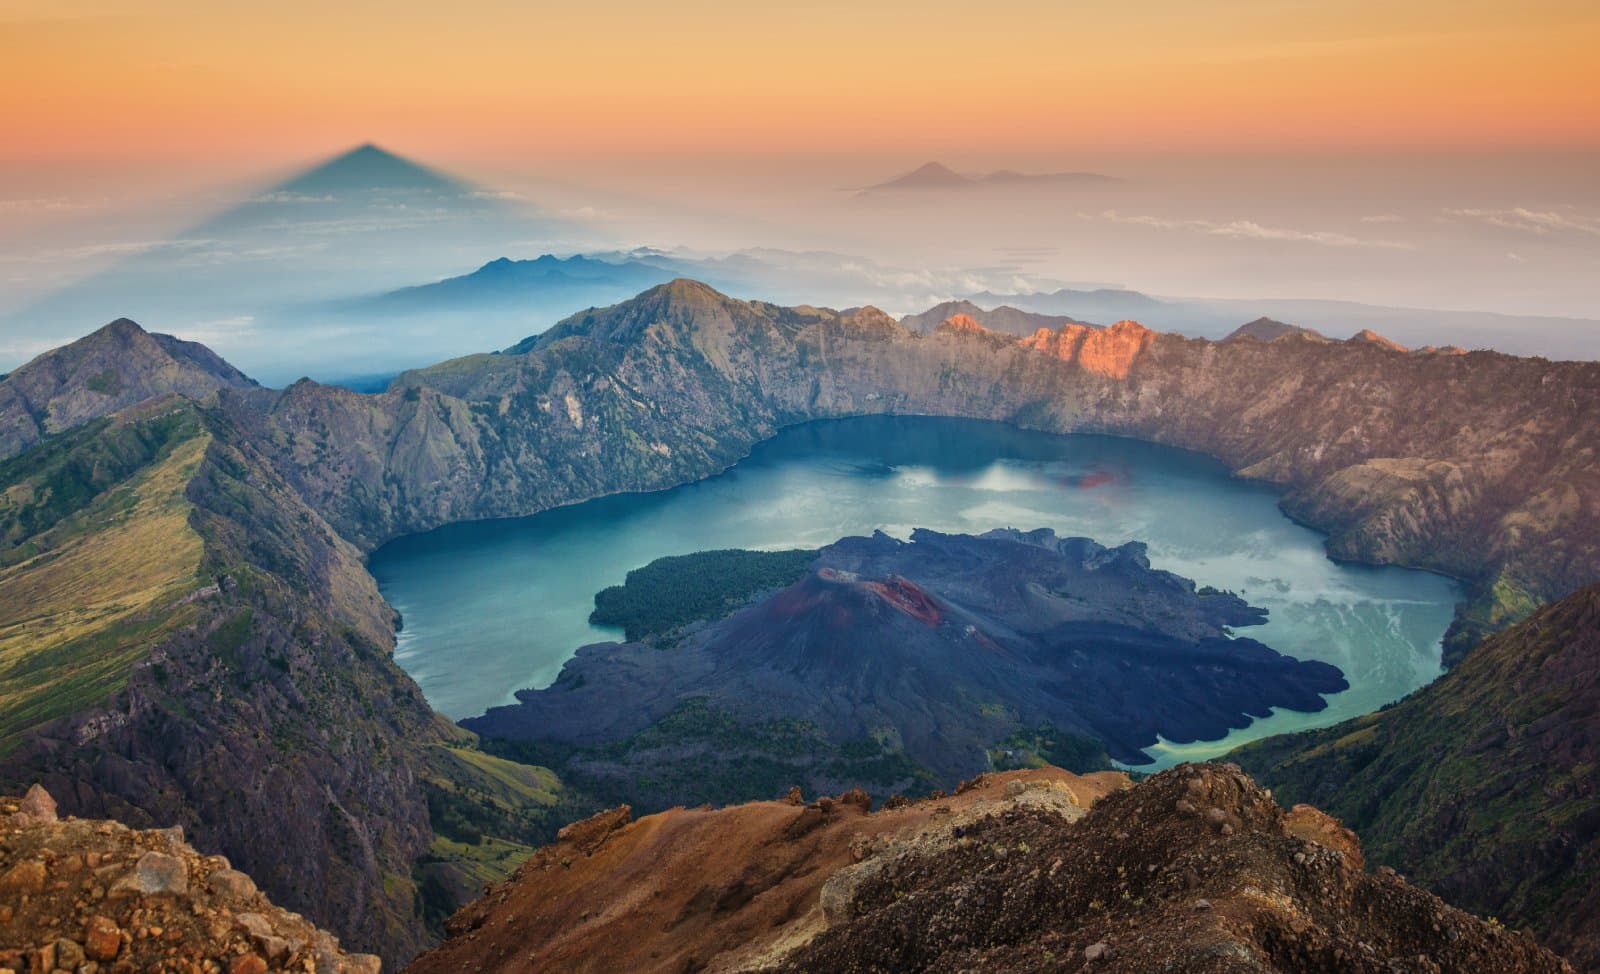 <p class="wp-caption-text">Image Credit: Shutterstock / rob_travel</p>  <p><span>Lombok, often heralded as Bali’s quieter sibling, offers an equally mesmerizing but more serene experience. The island’s natural landscapes encompass pristine beaches, the majestic Mount Rinjani, and lush tropical forests, making it a haven for adventurers and nature lovers. Lombok is committed to sustainable tourism, with efforts focused on conserving its coral reefs, forests, and cultural heritage. The Sasak people, native to Lombok, warmly share their traditions and crafts, adding a rich cultural dimension to the visitor experience. From trekking to the summit of Rinjani to diving in the Gili Islands’ coral gardens, Lombok presents an array of eco-friendly activities highlighting the island’s natural beauty and biodiversity.</span></p> <p><b>Insider’s Tip:</b><span> For a unique cultural experience, visit the traditional Sasak village of Sade or Ende to learn about the island’s indigenous architecture and weaving crafts.</span></p> <p><b>When to Travel:</b><span> The best time to visit Lombok is during the dry season from May to September, offering ideal conditions for outdoor activities.</span></p> <p><b>How to Get There:</b><span> Lombok International Airport welcomes flights from major Indonesian cities and select international destinations. Taxi and shuttle services provide transportation across the island from the airport.</span></p>